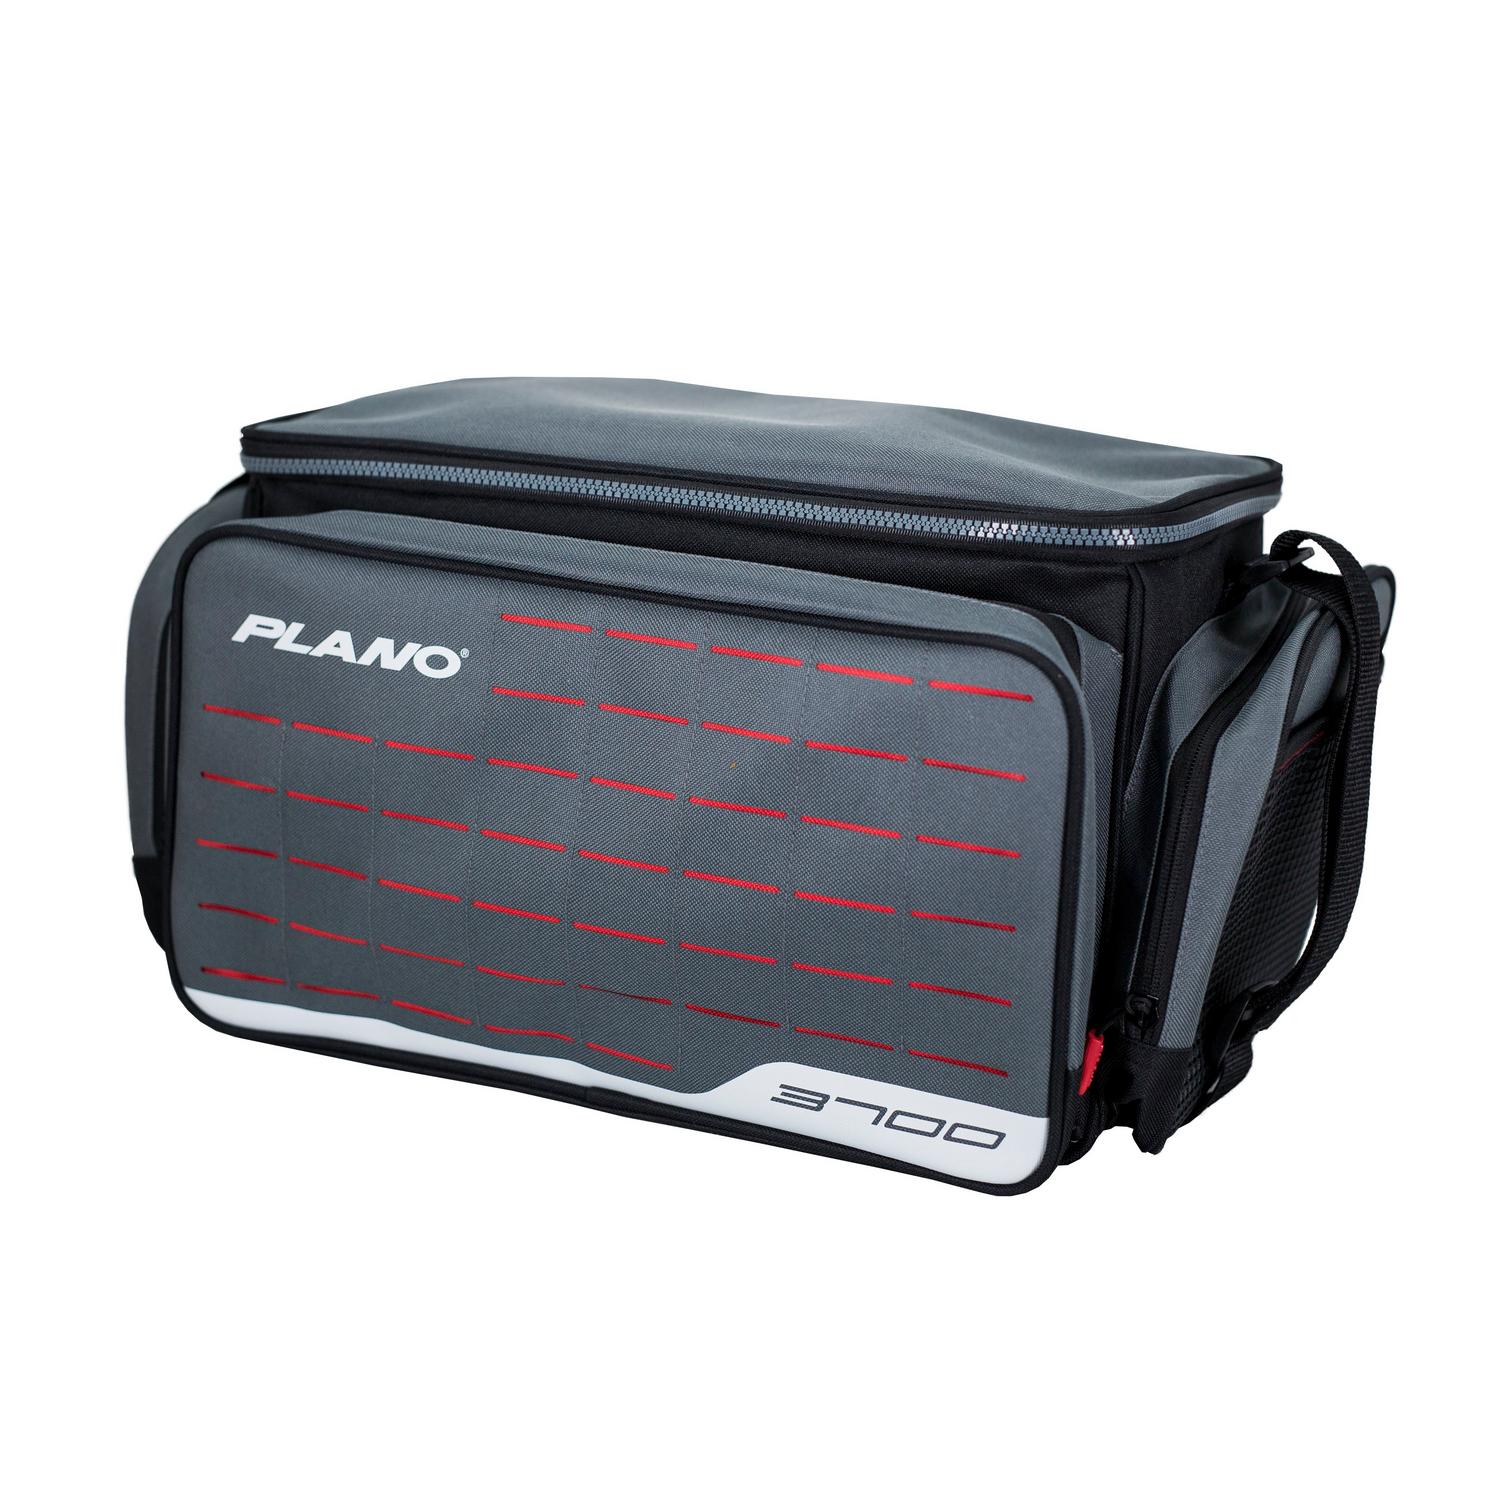 Looking for a large duffle/tackle bag to hold Plano 3700 size